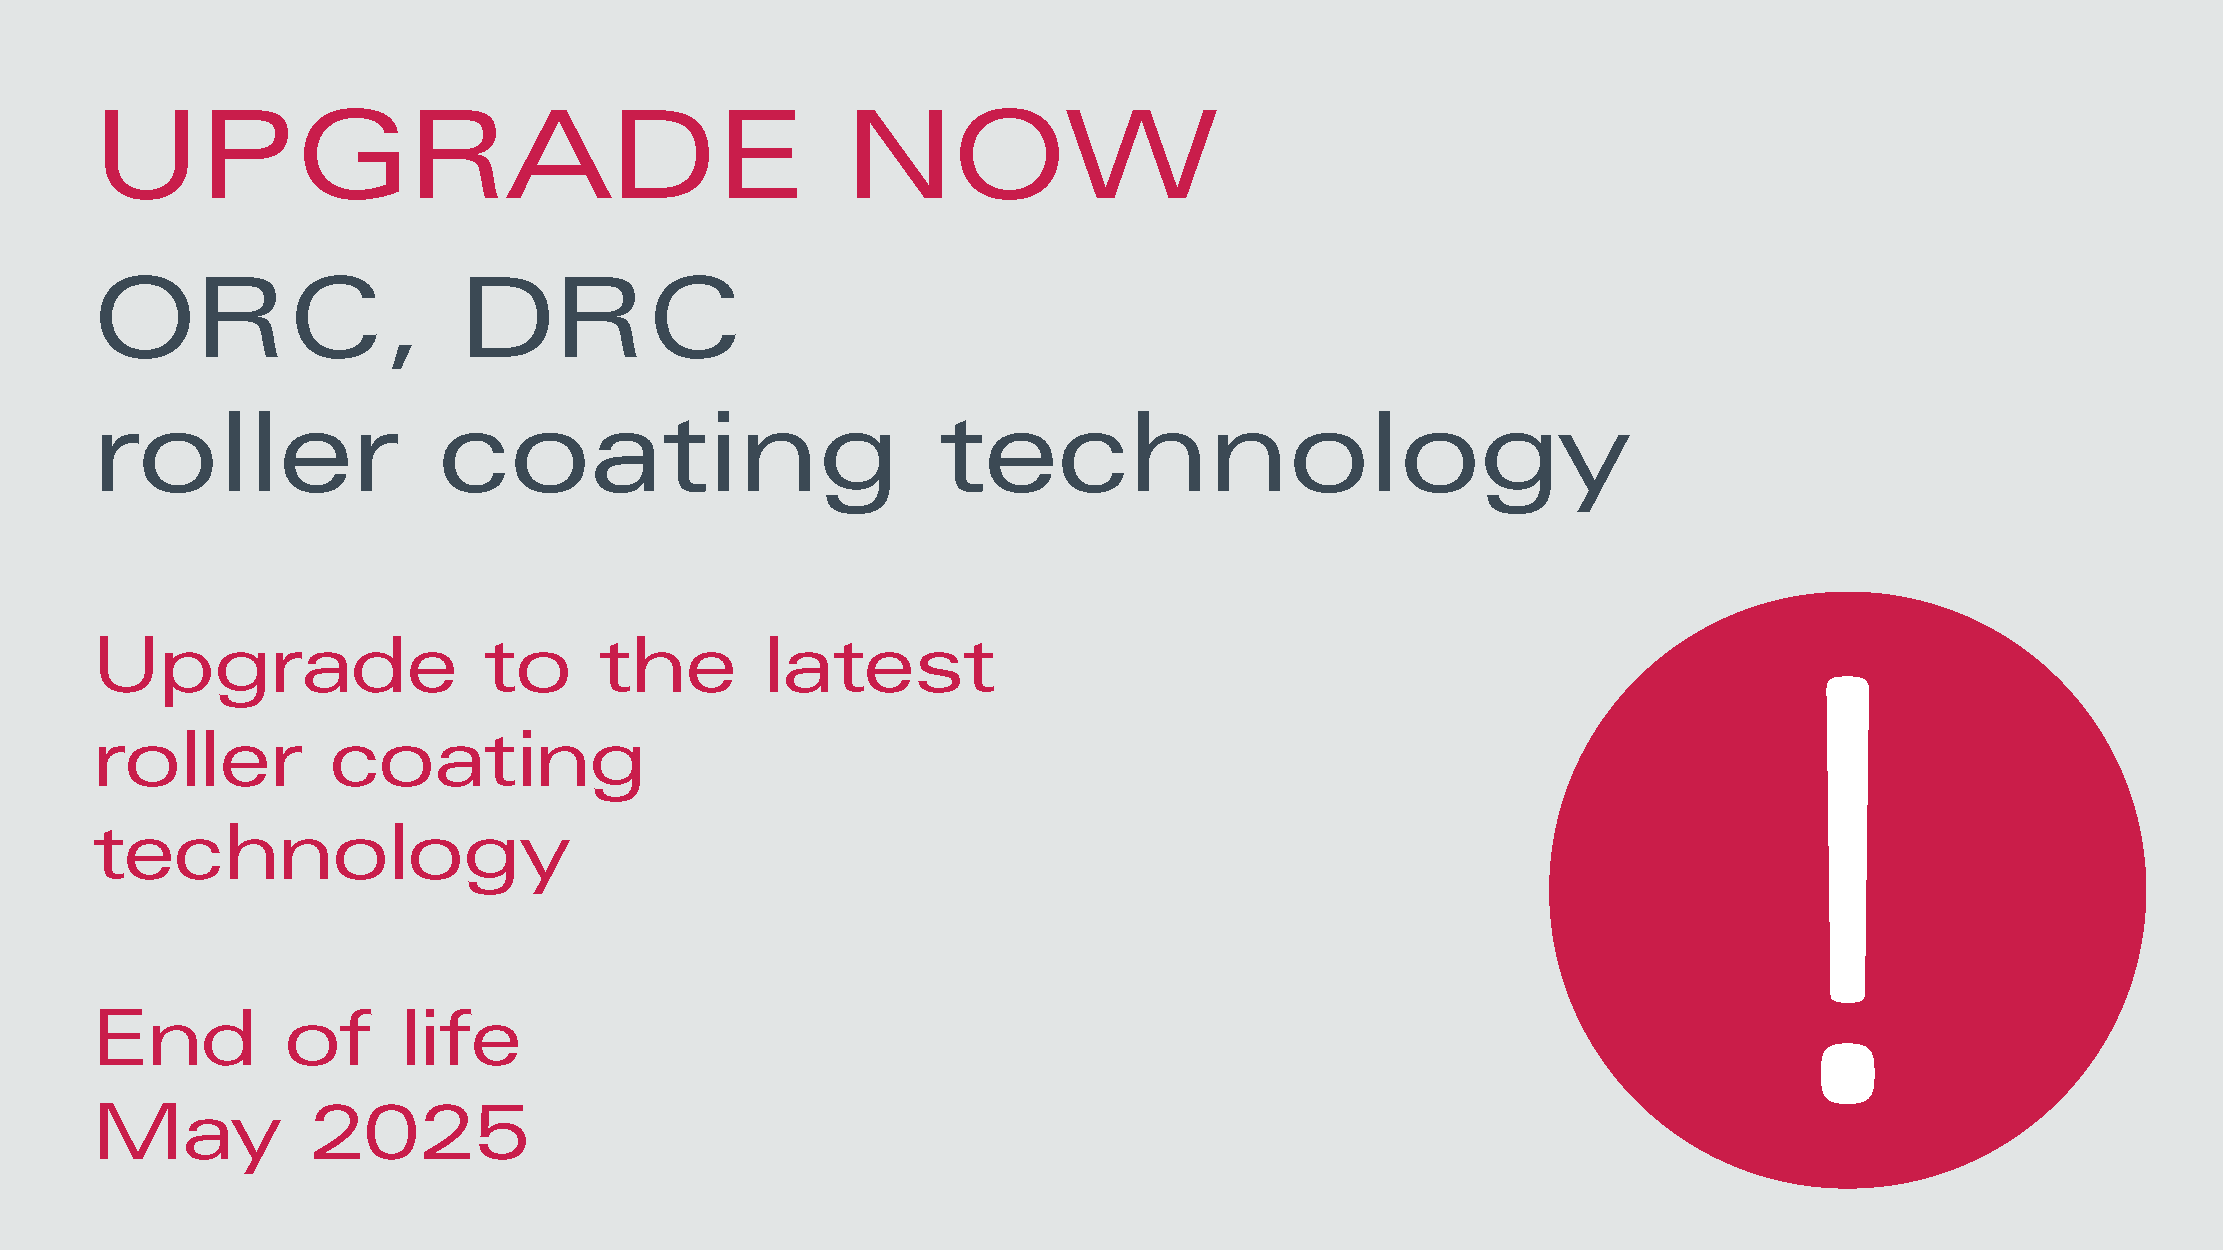 Phase-out ORC, DRC roller coating technology